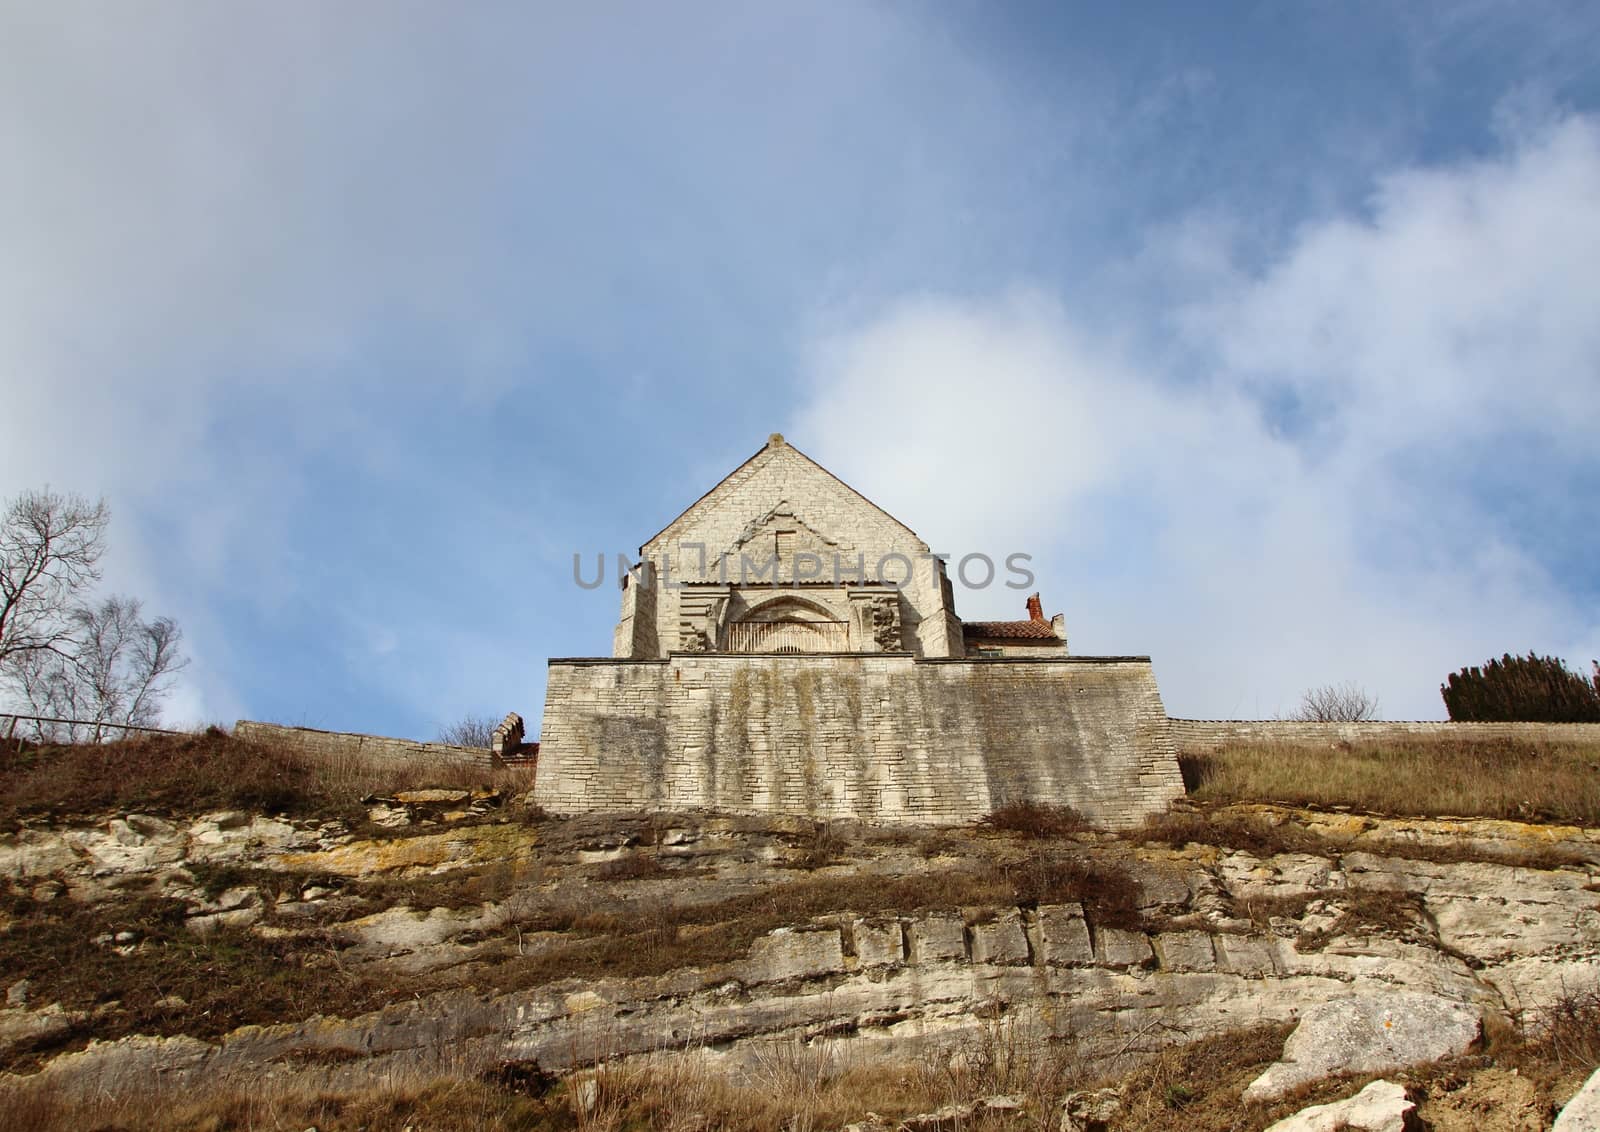 Church at Stevn Klint edge of Cliff in Frog Perspective looking Upwards